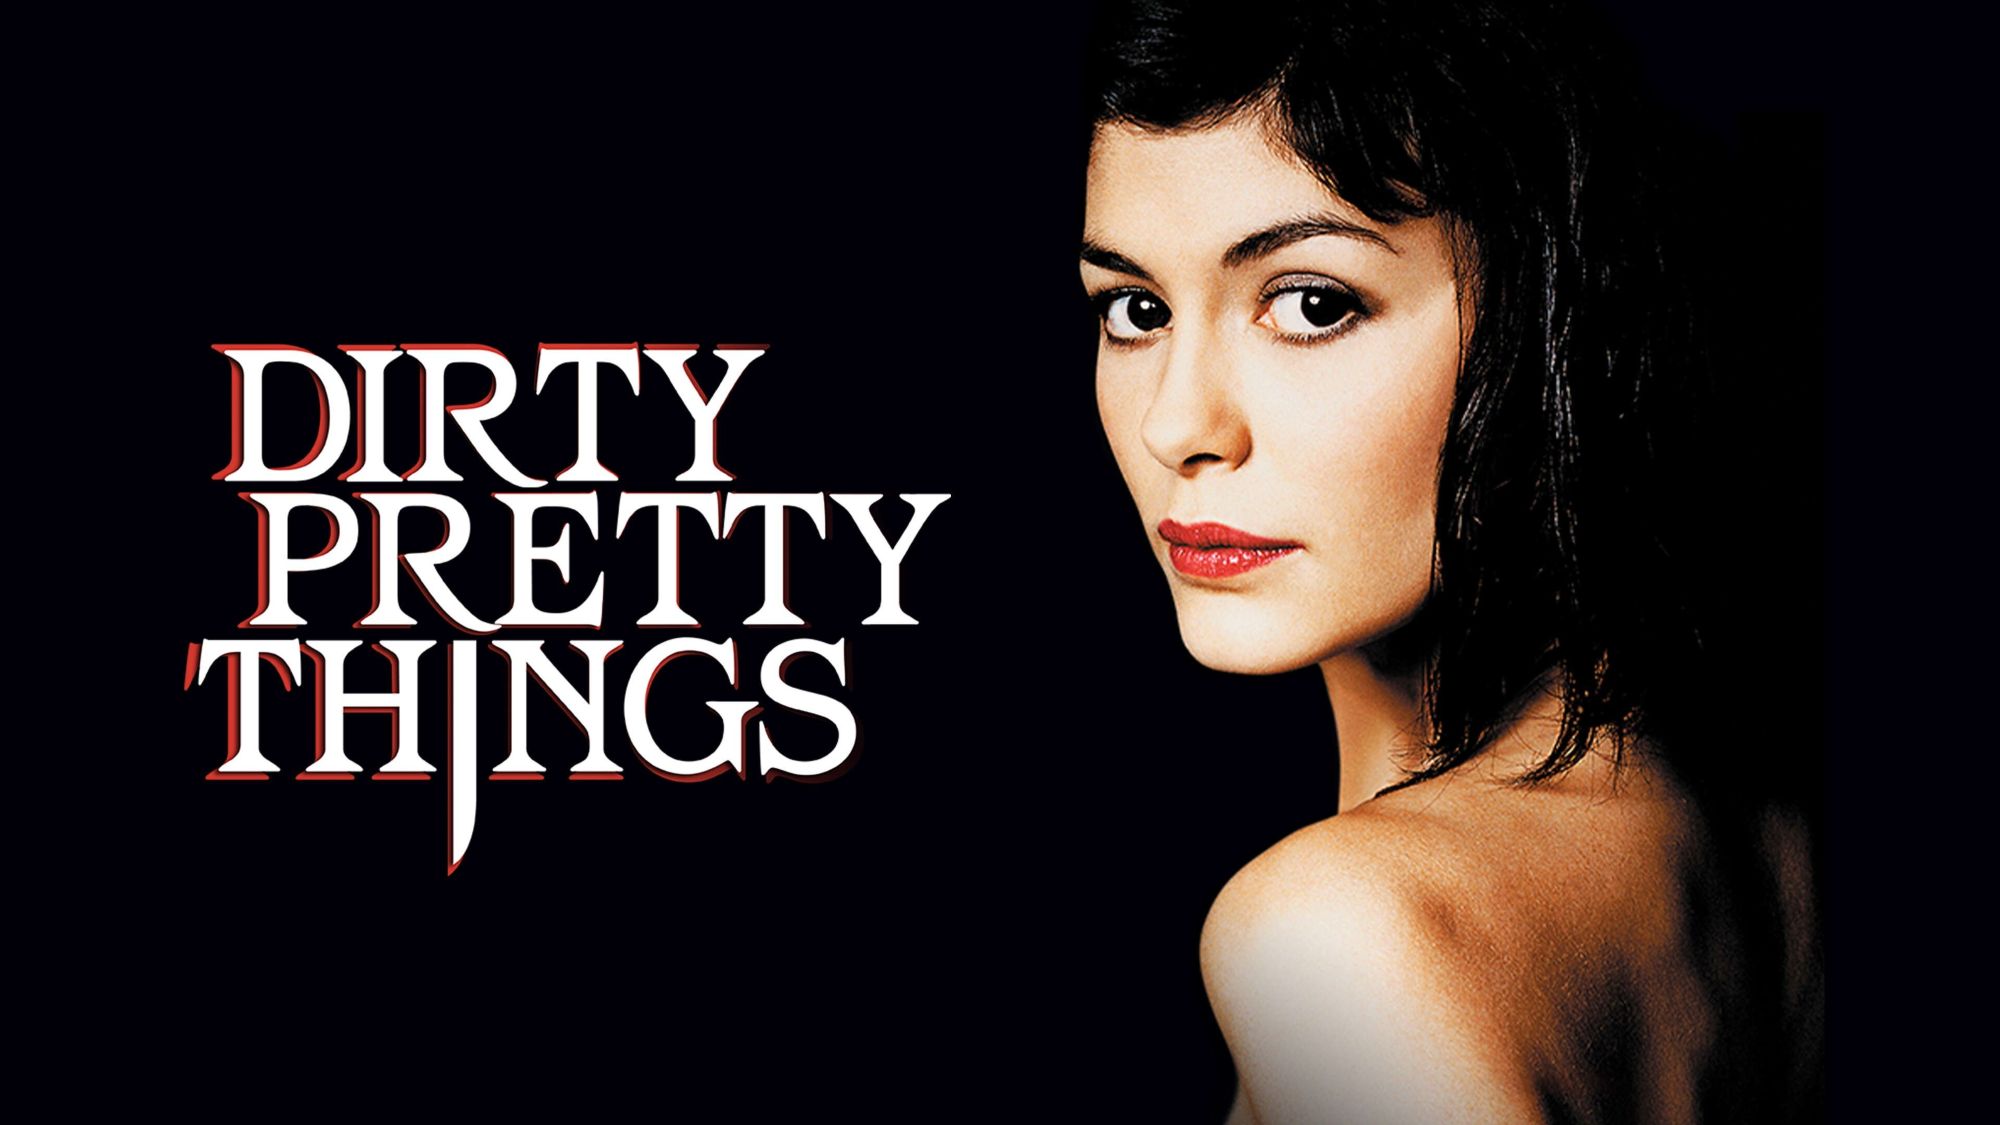 35-facts-about-the-movie-dirty-pretty-things